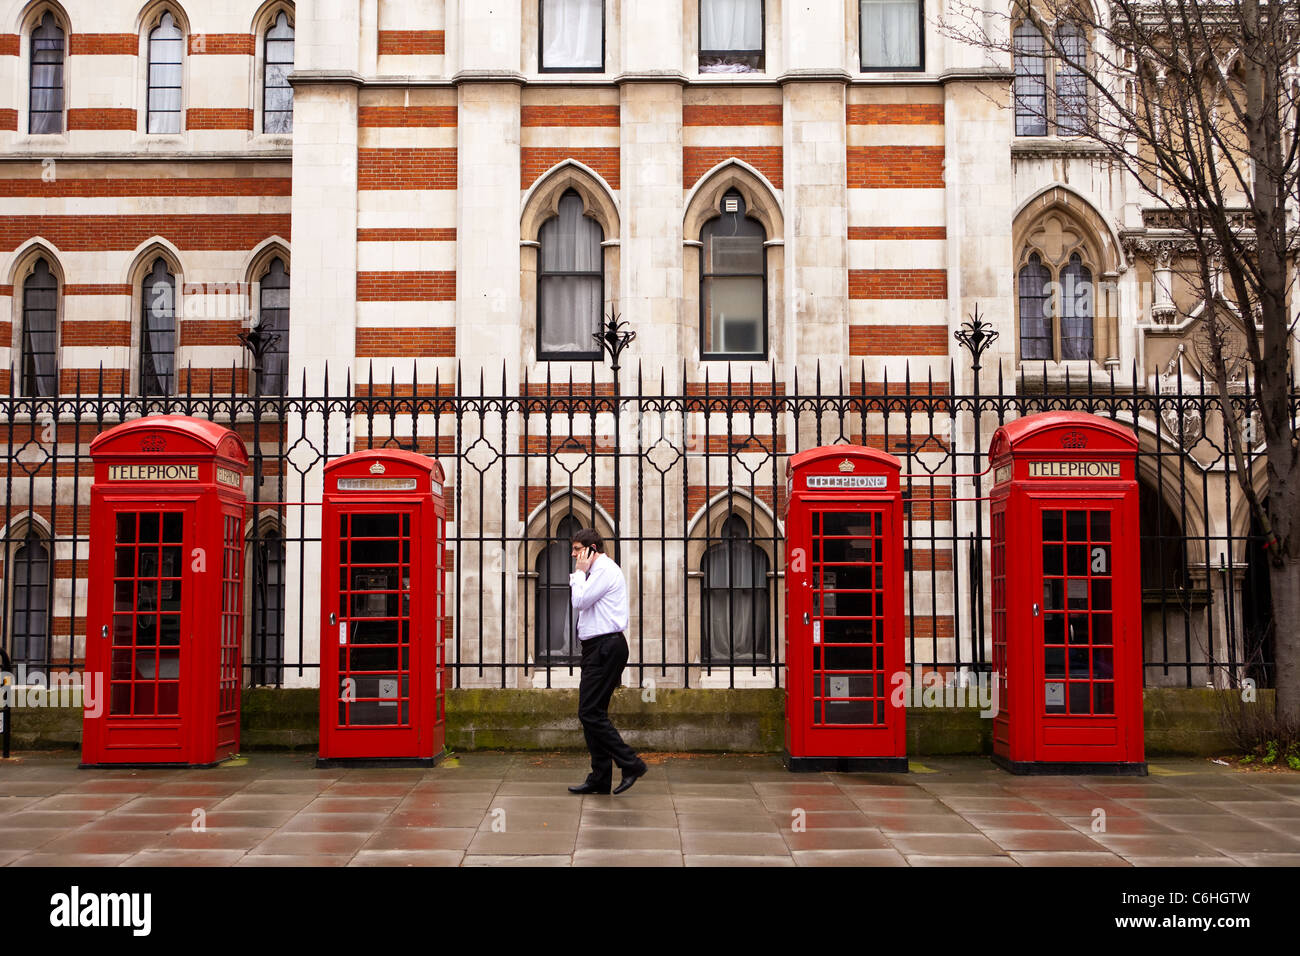 Mobile phone user next to red phone boxes near the High Court, Chancery Lane, London Stock Photo